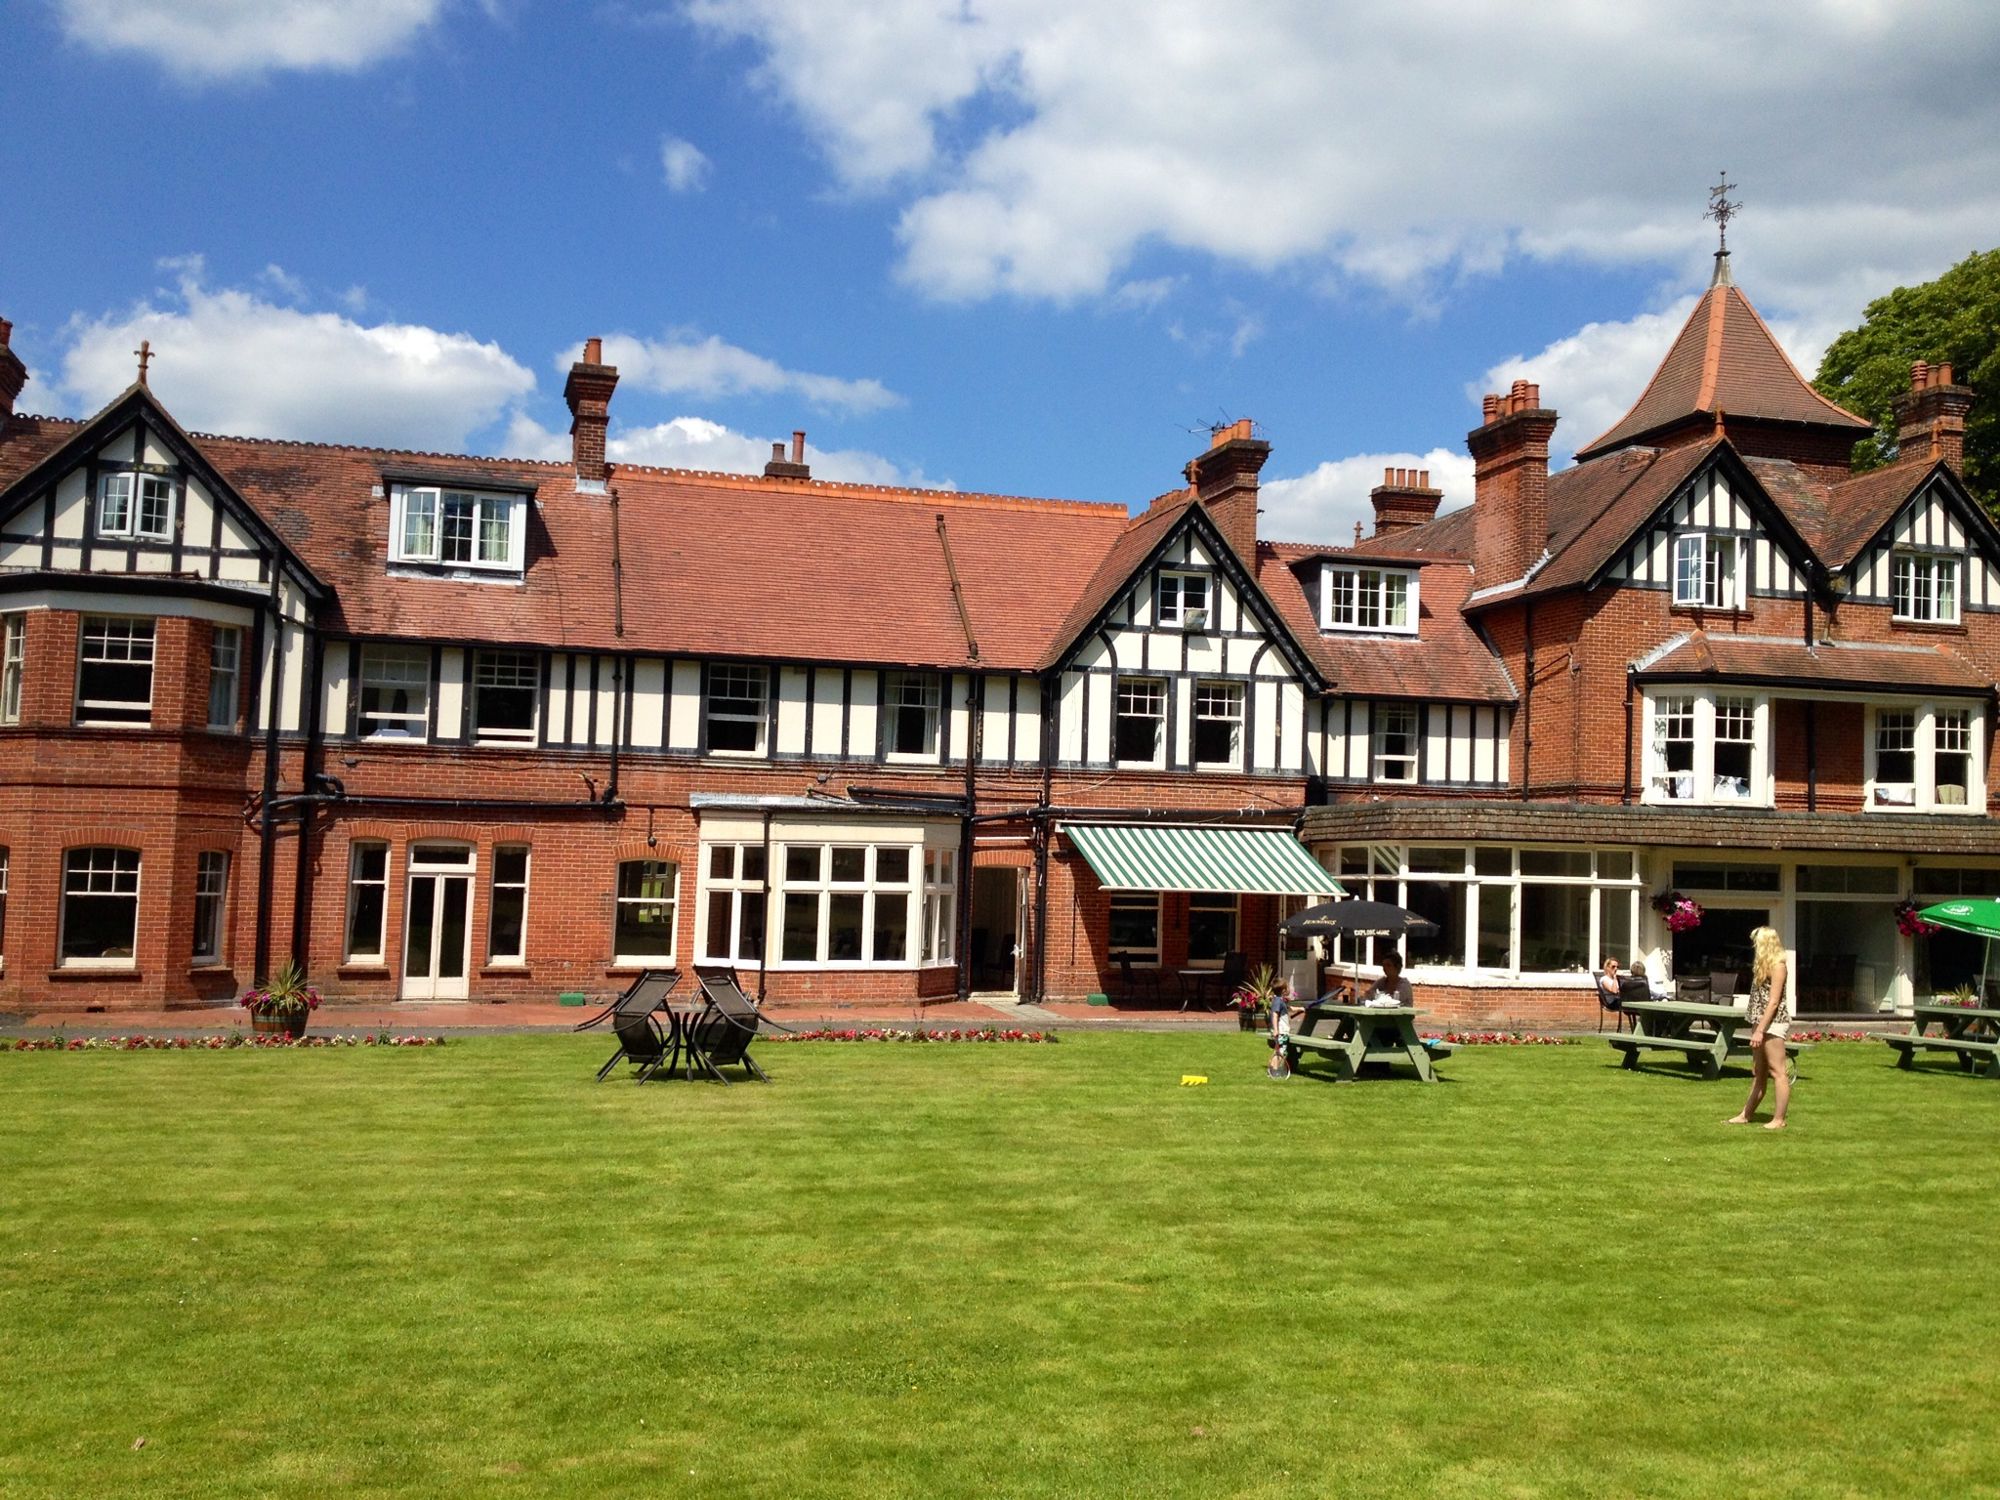 Hotels in Hampshire holidays at Cool Places